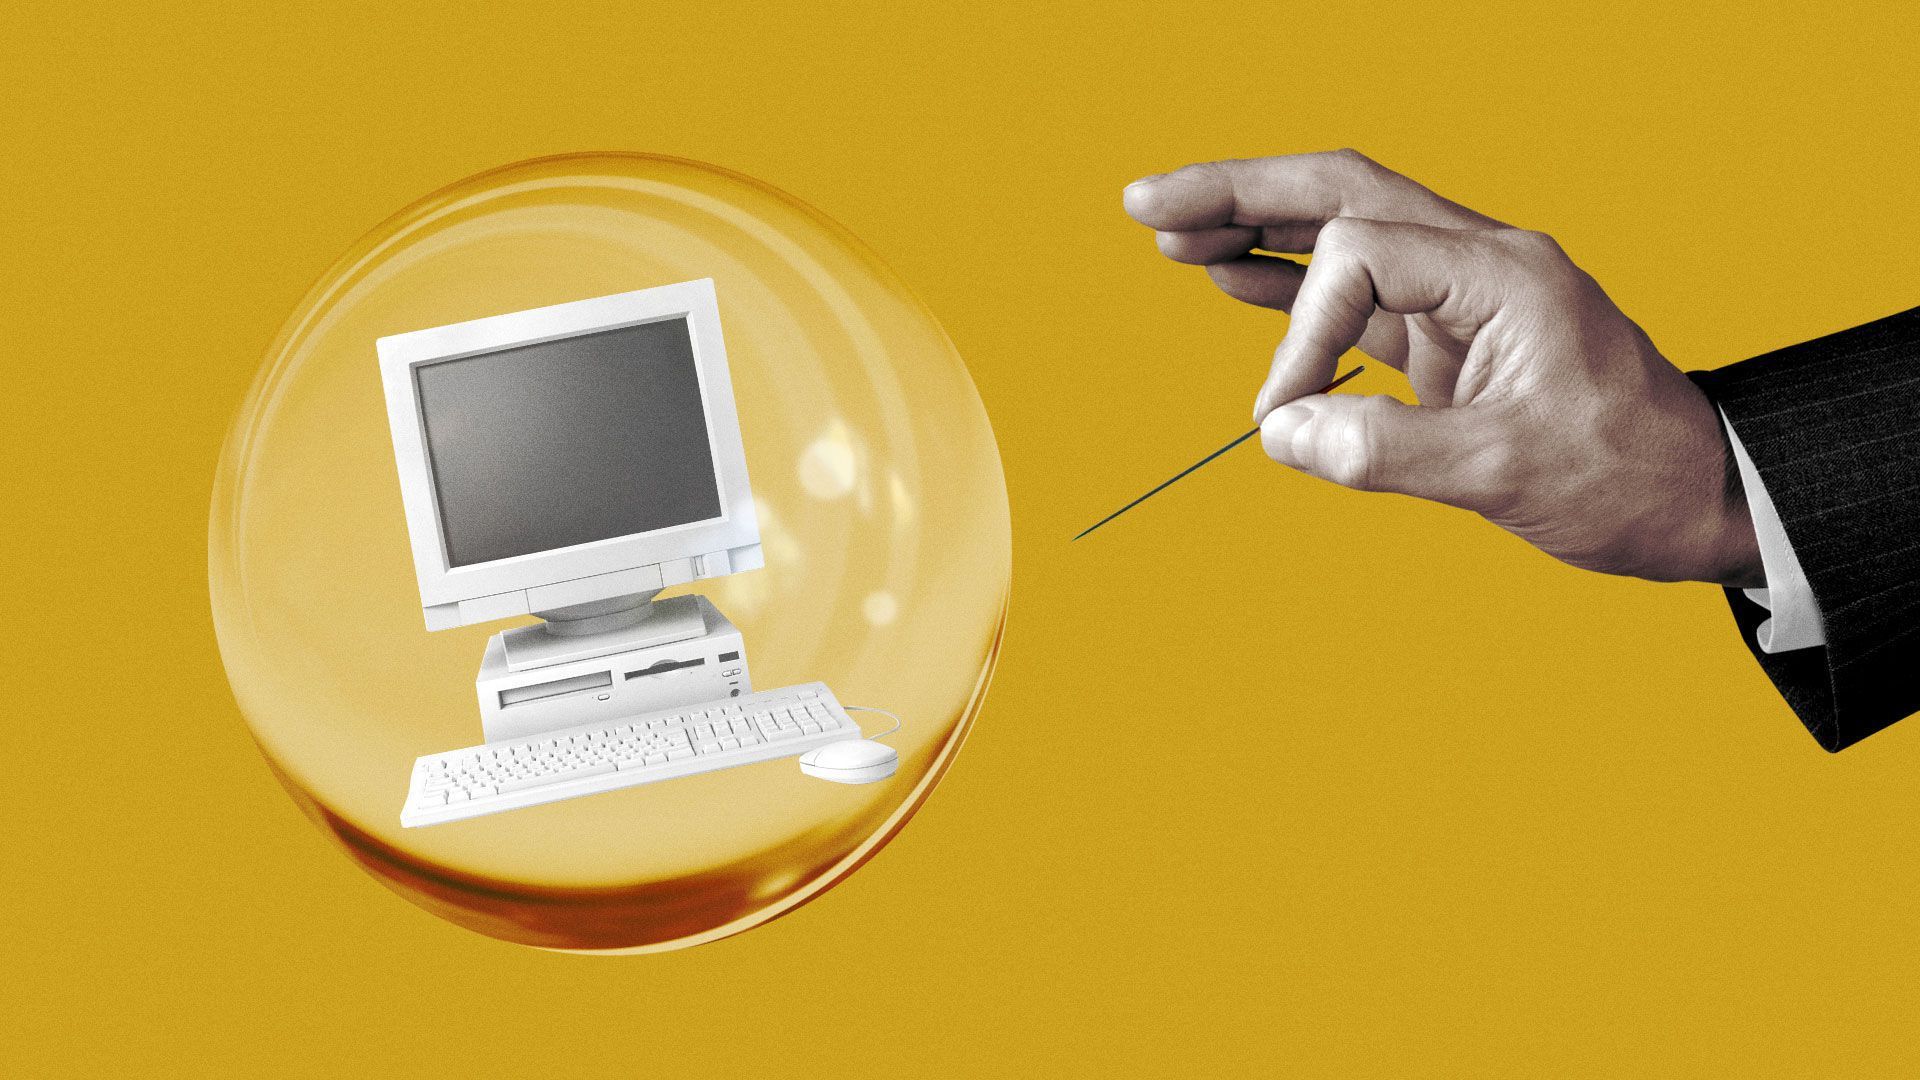 An illustration of a PC in a bubble being approached by a hand with a pin